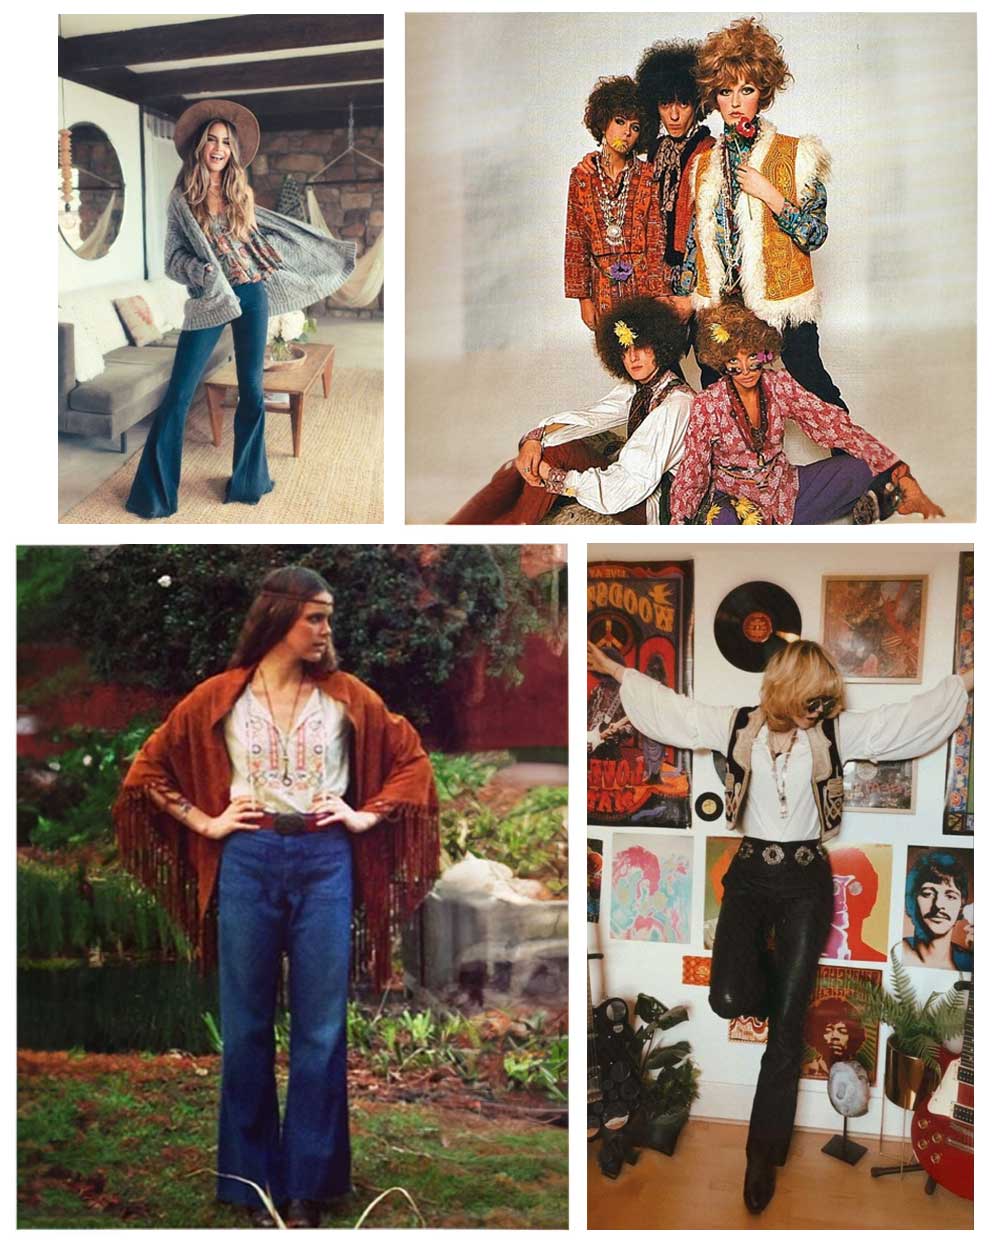 The 80s saw a blend of bohemian motifs and new-wave influences, mixing floral patterns with ripped jeans and biker jackets.